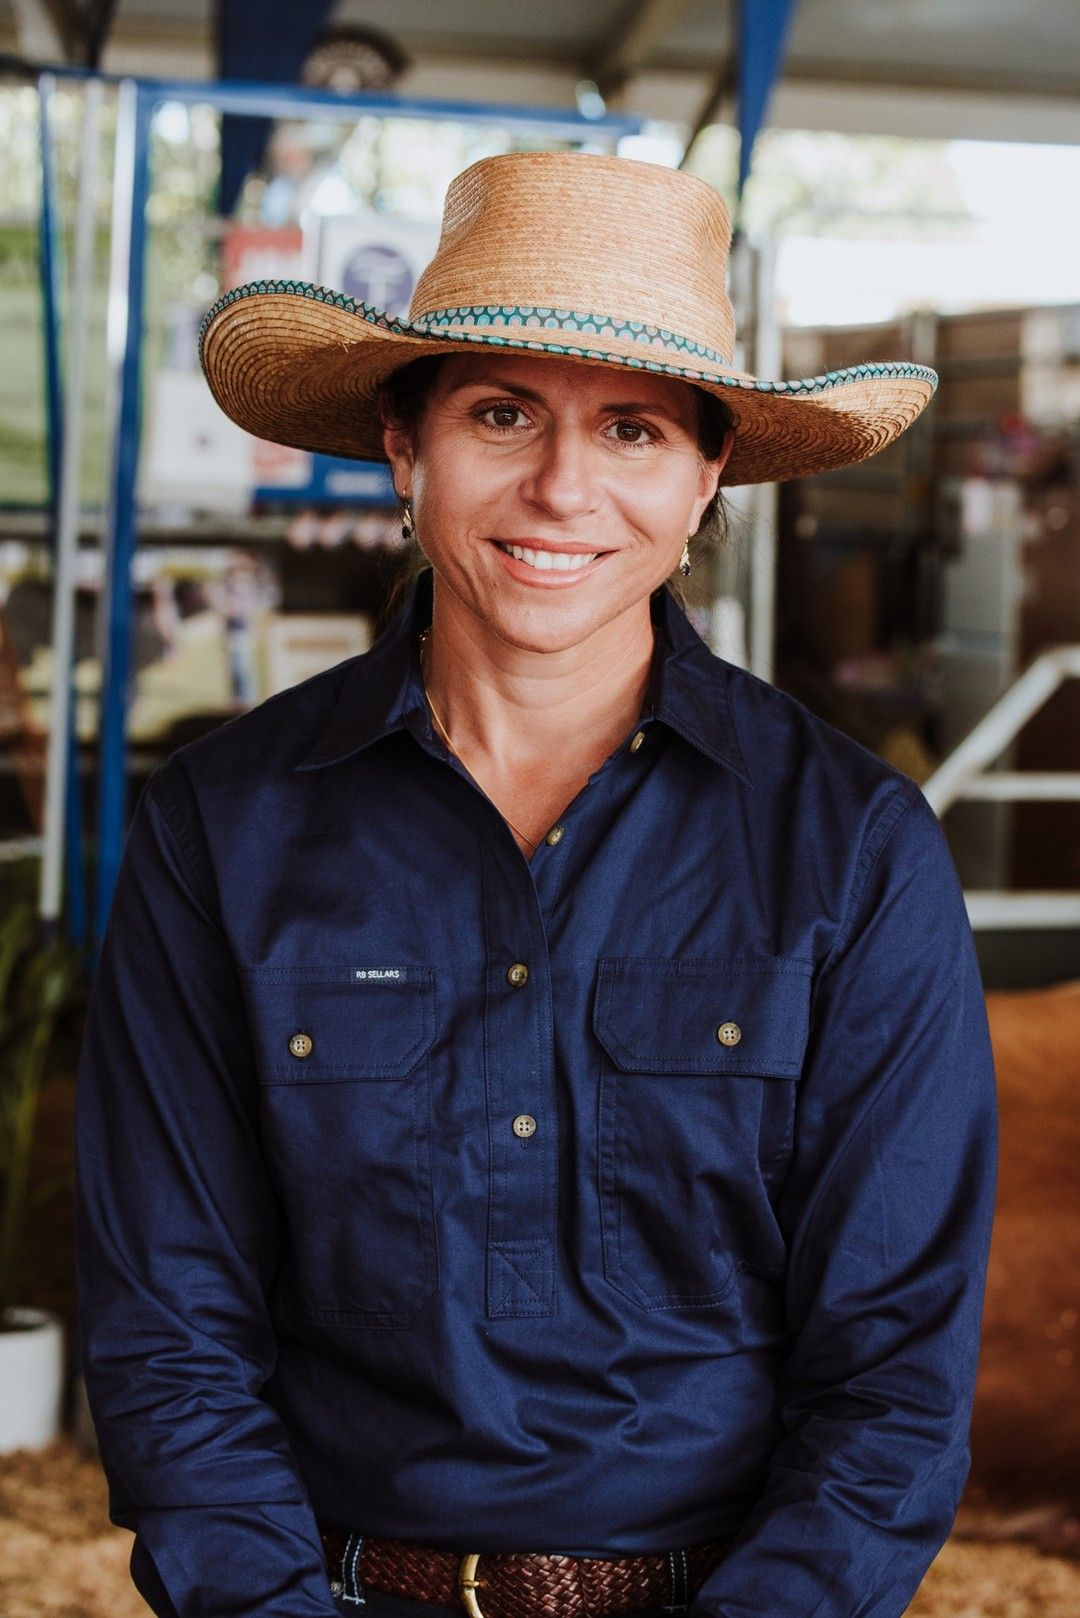 Best of Beef24 | Cherie Gooding

Cherie Gooding is a Charbray breeder fro...

#RBSellars #Beef24 #Beef2024